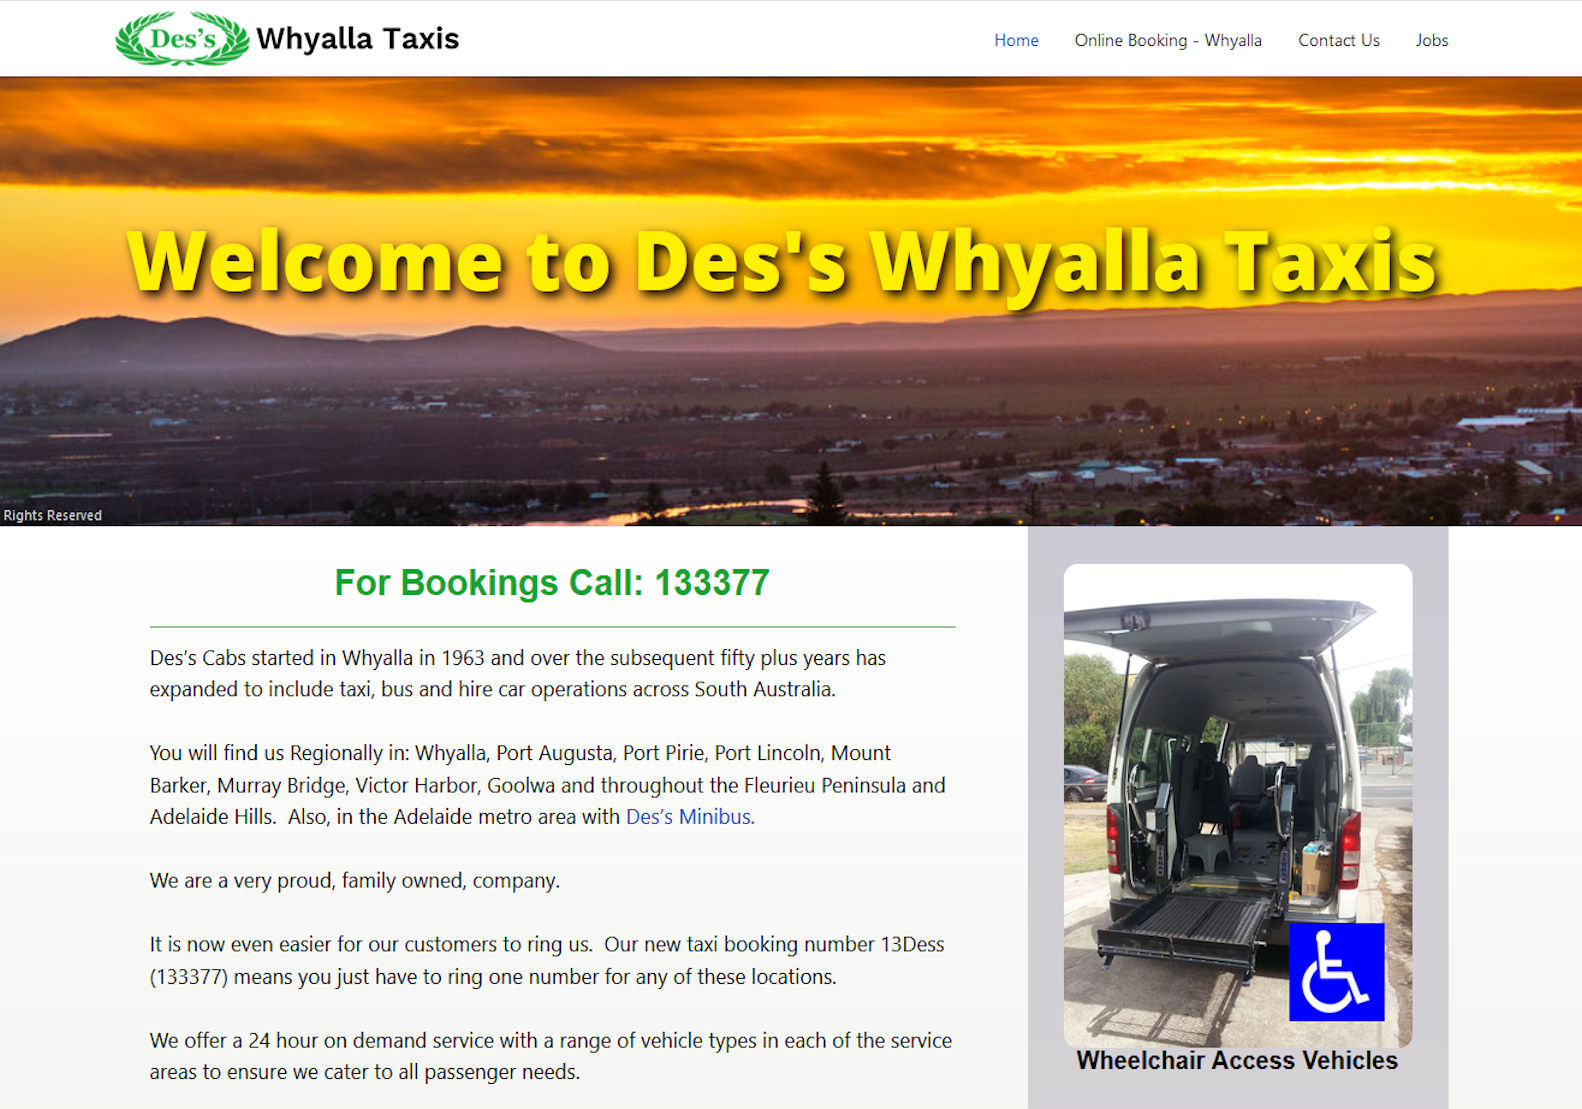 Des’s Whyalla Taxis